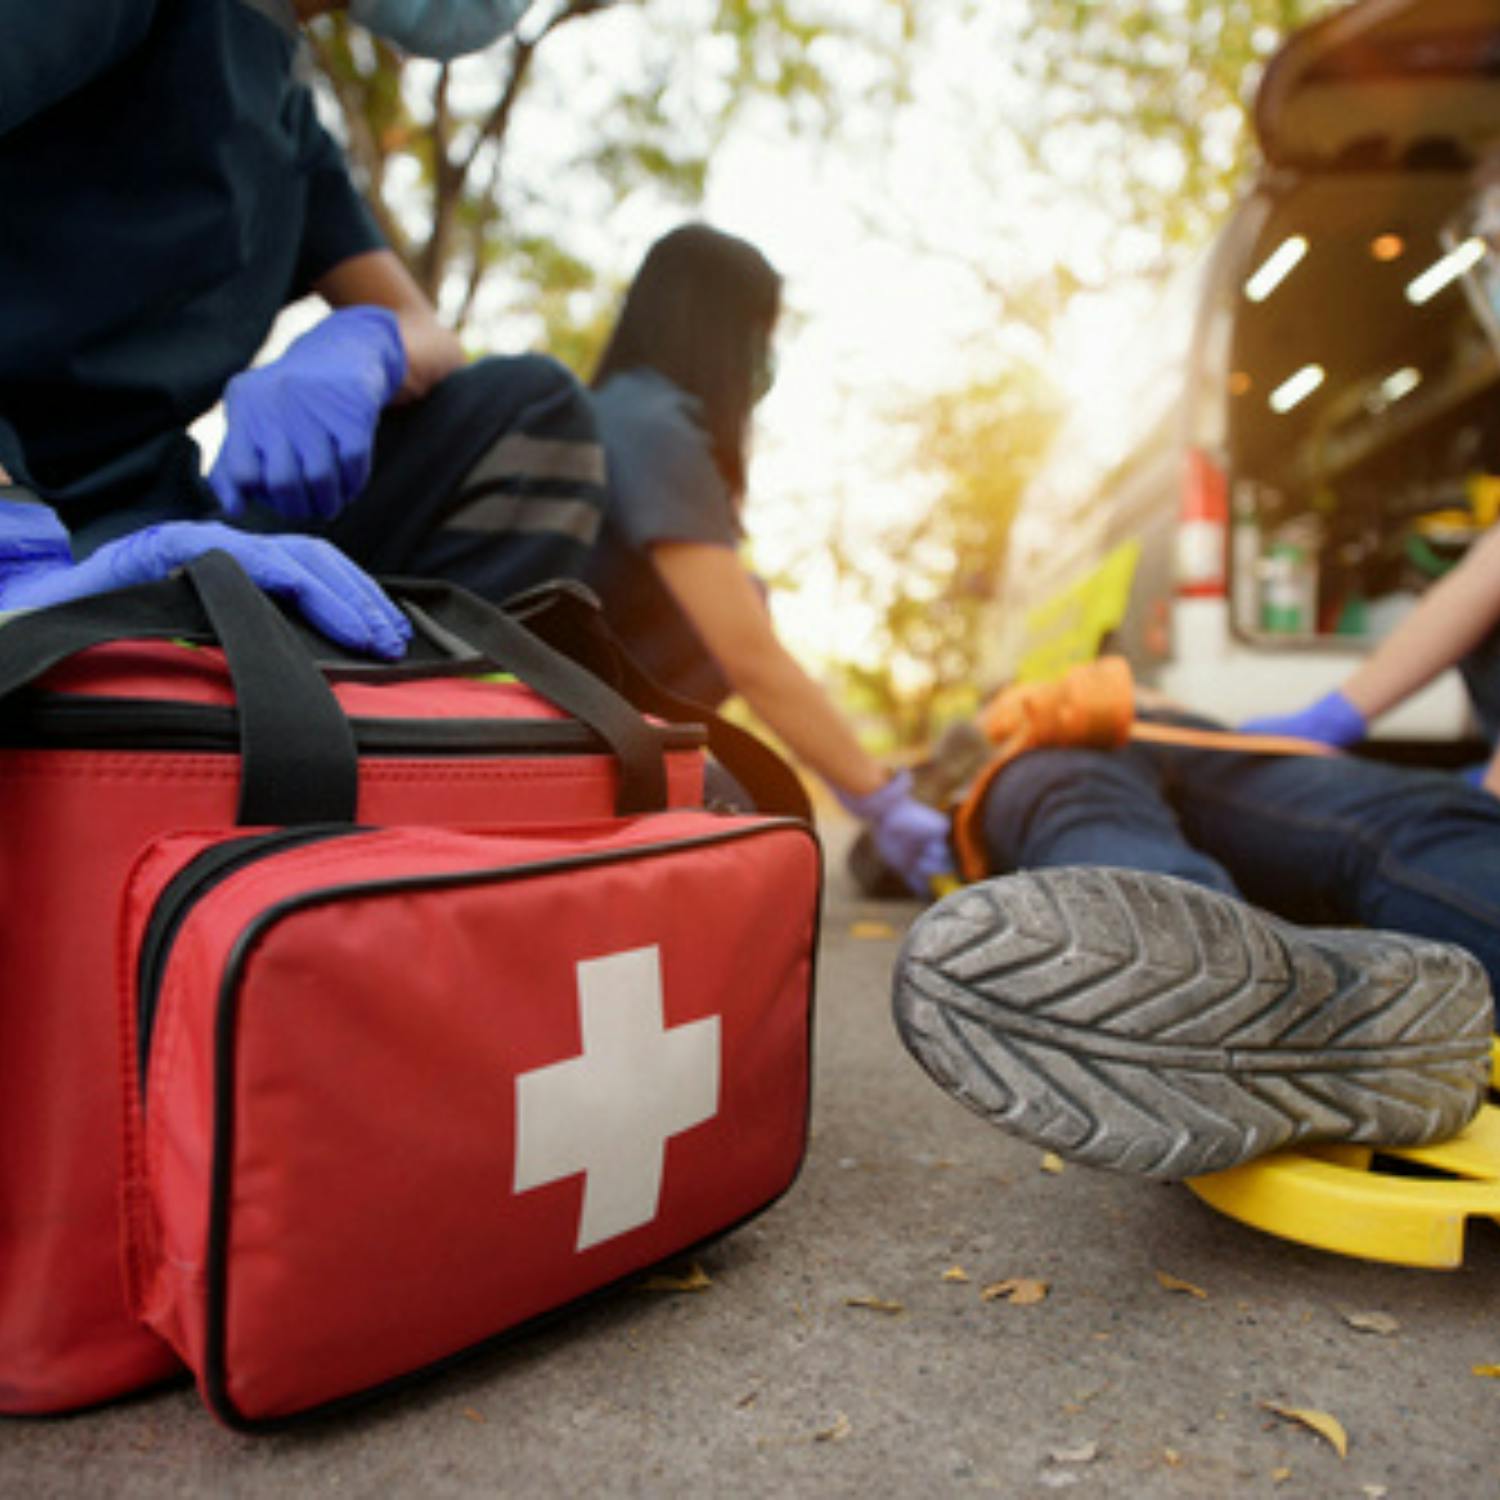 Concerns about the lack of pre-hospital emergency care in Ireland